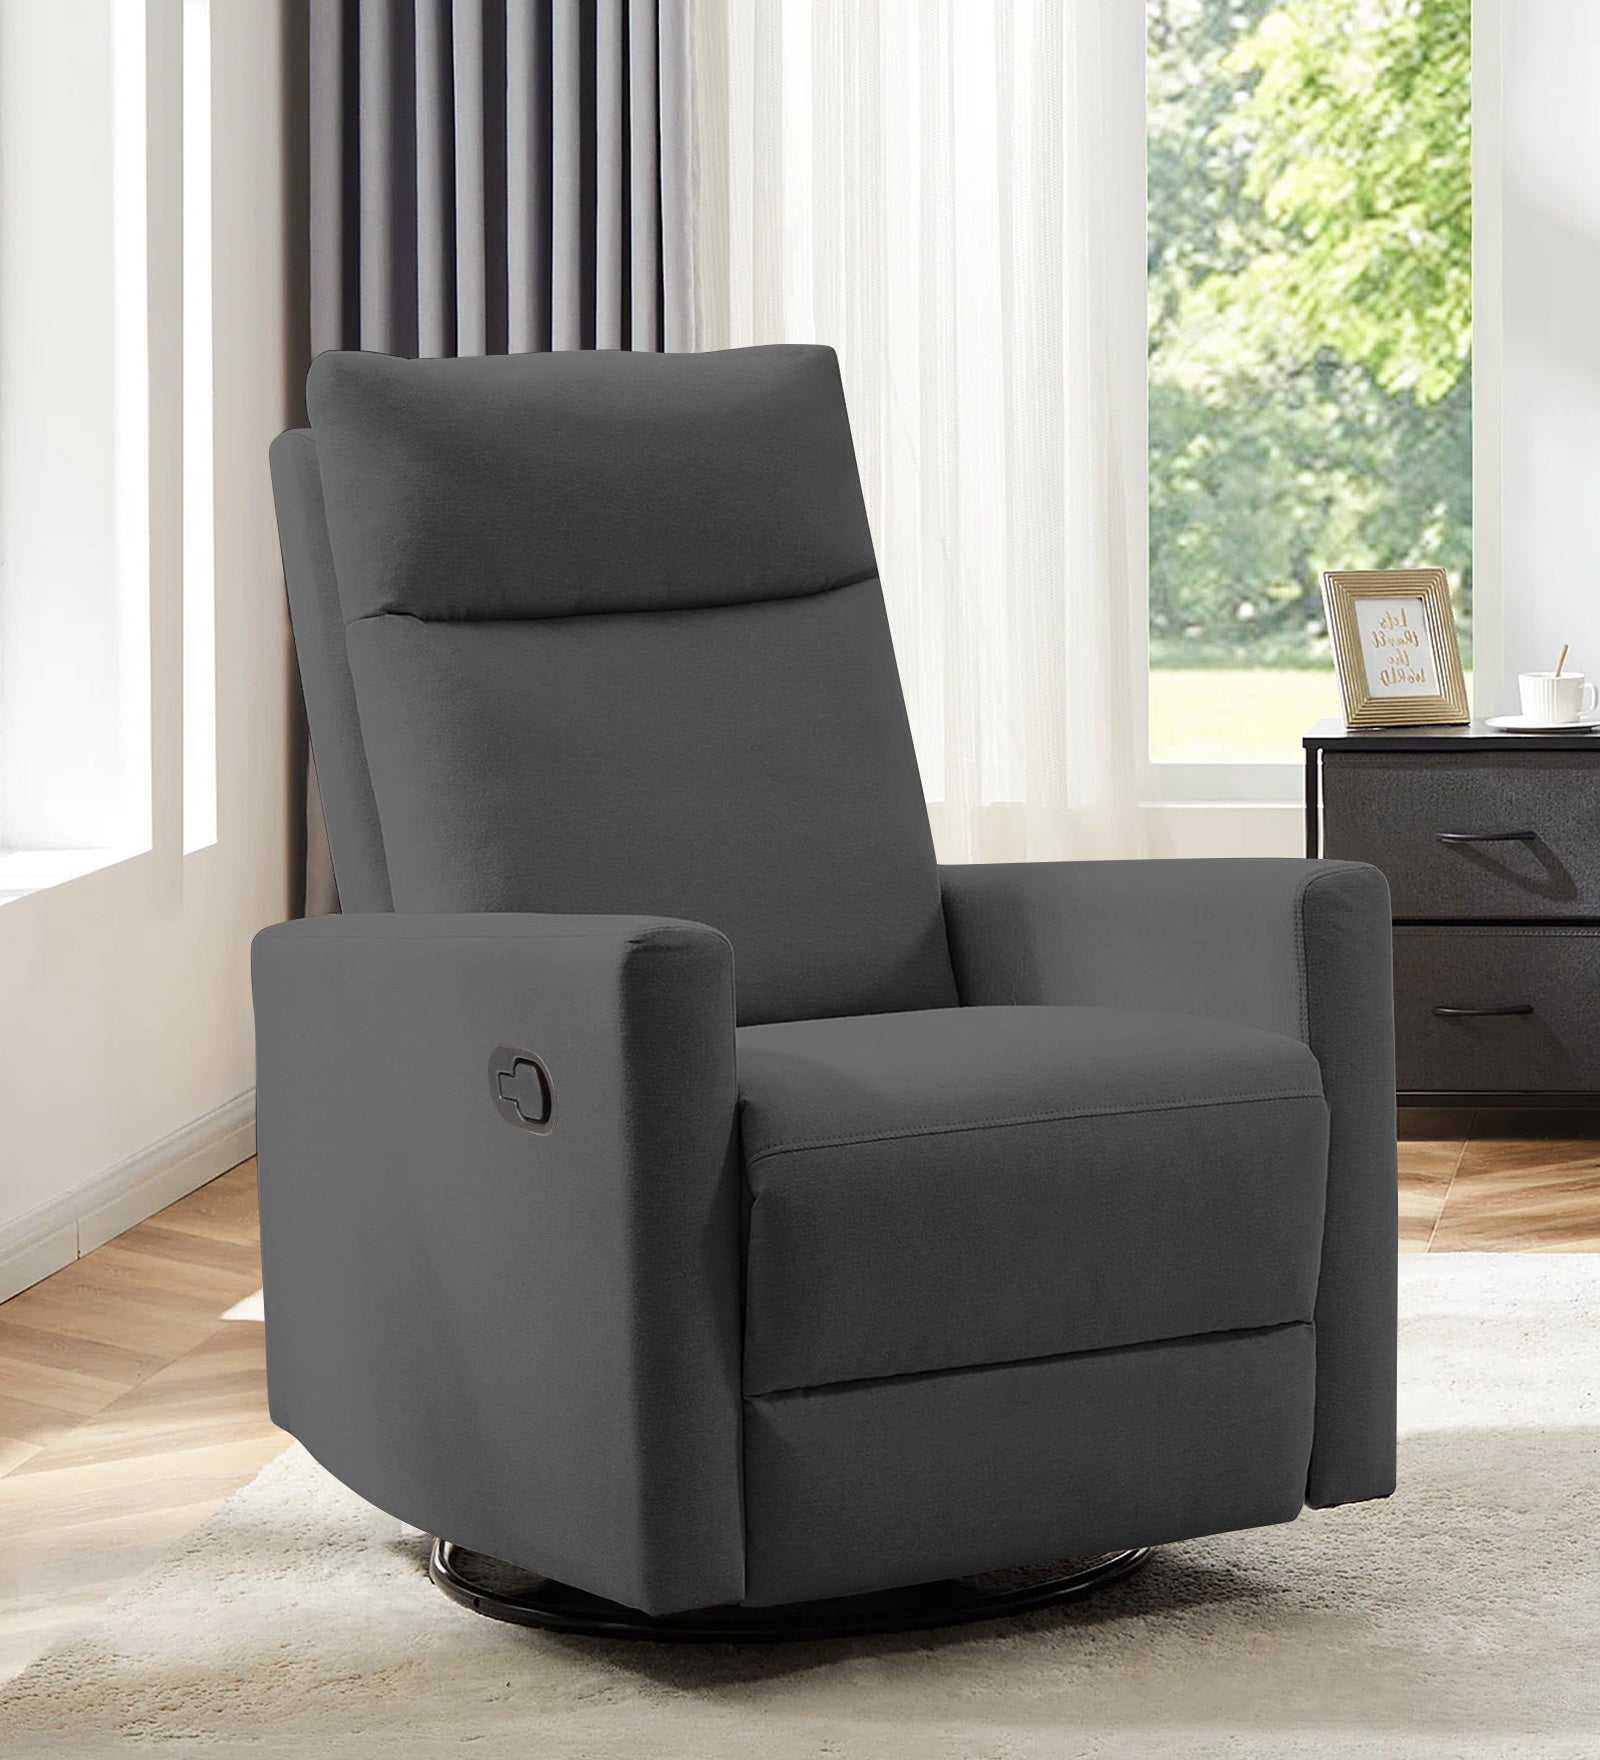 Zura Fabric Manual 1 Seater Recliner In Charcoal Grey Colour